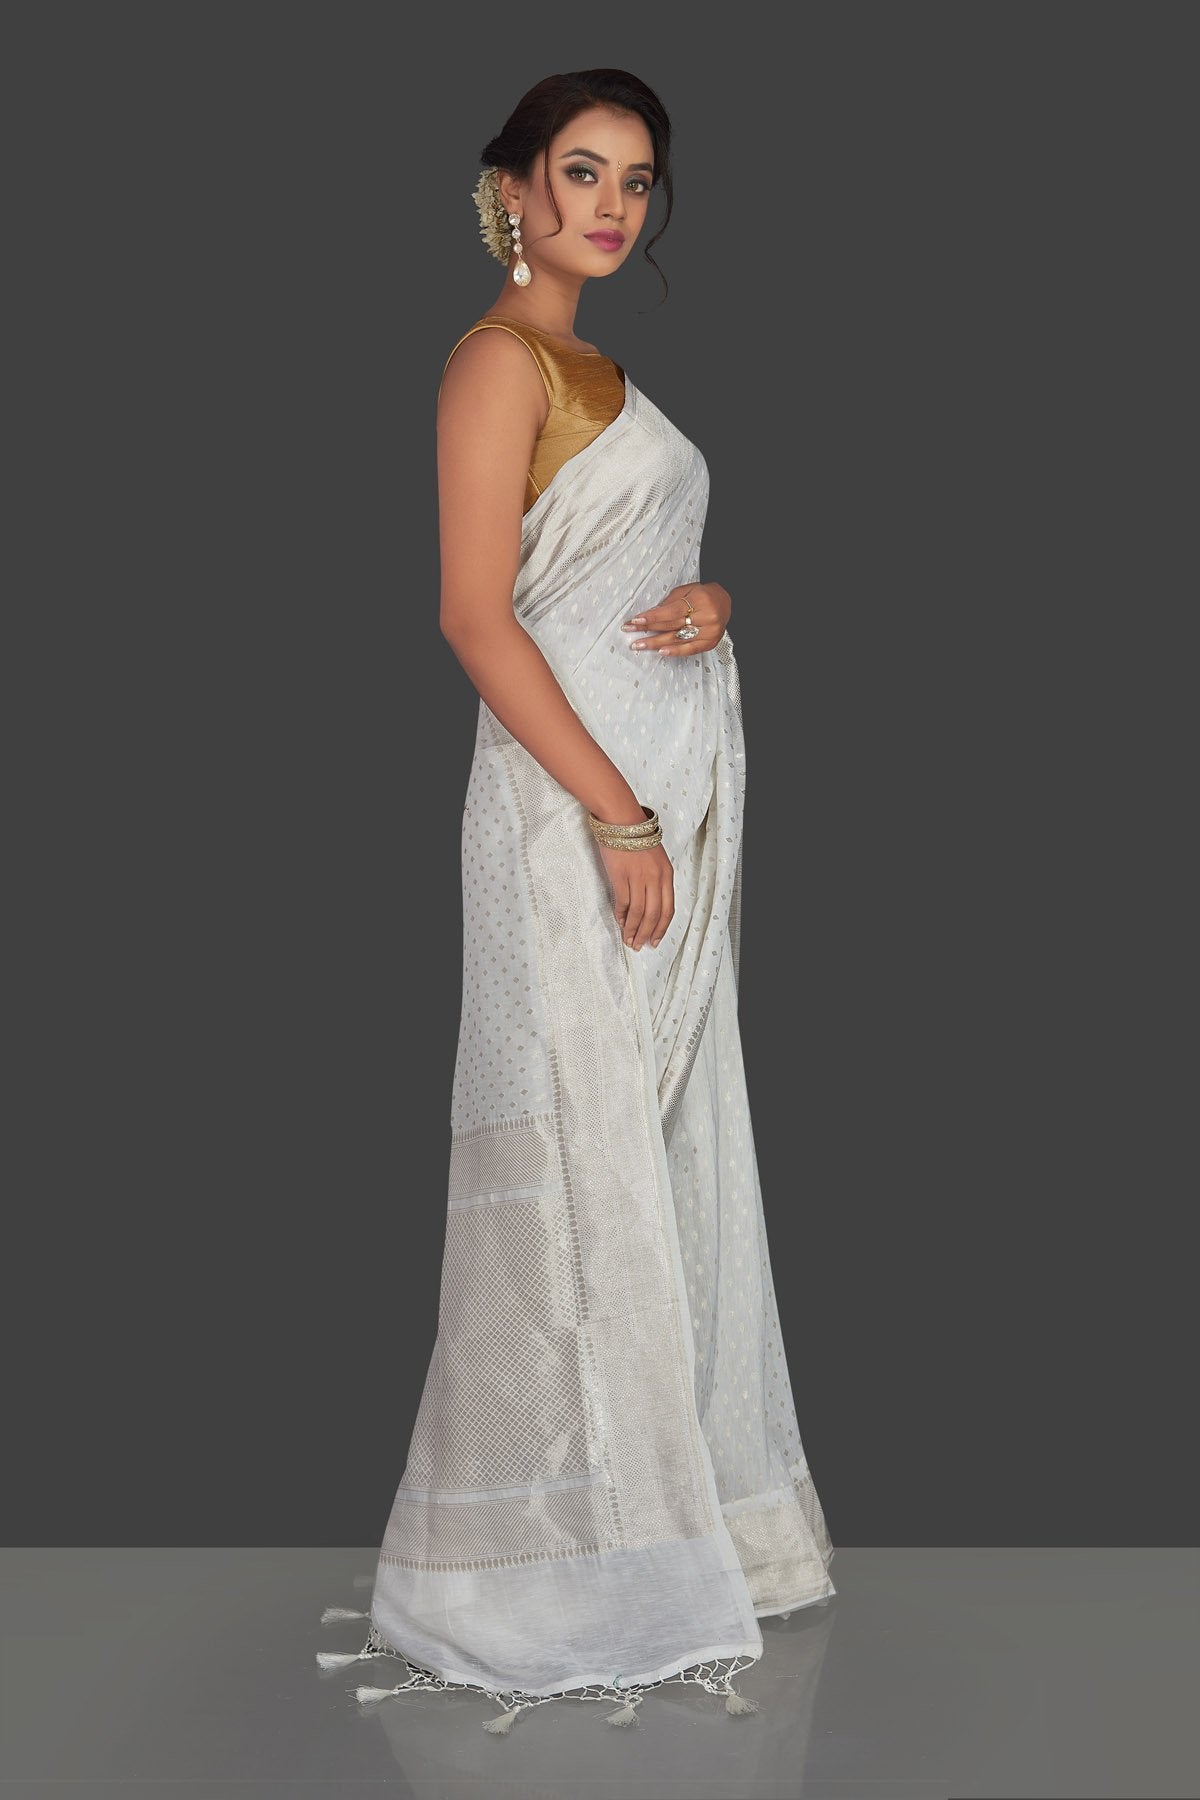 Shop white tassar georgette Banarsi saree online in USA with silver zari border. Radiate elegance with handloom sarees with blouse, tussar silk saris, Banarsi sarees from Pure Elegance Indian fashion boutique in USA. We bring a especially curated collection of ethnic saris for Indian women in USA under one roof!-pallu